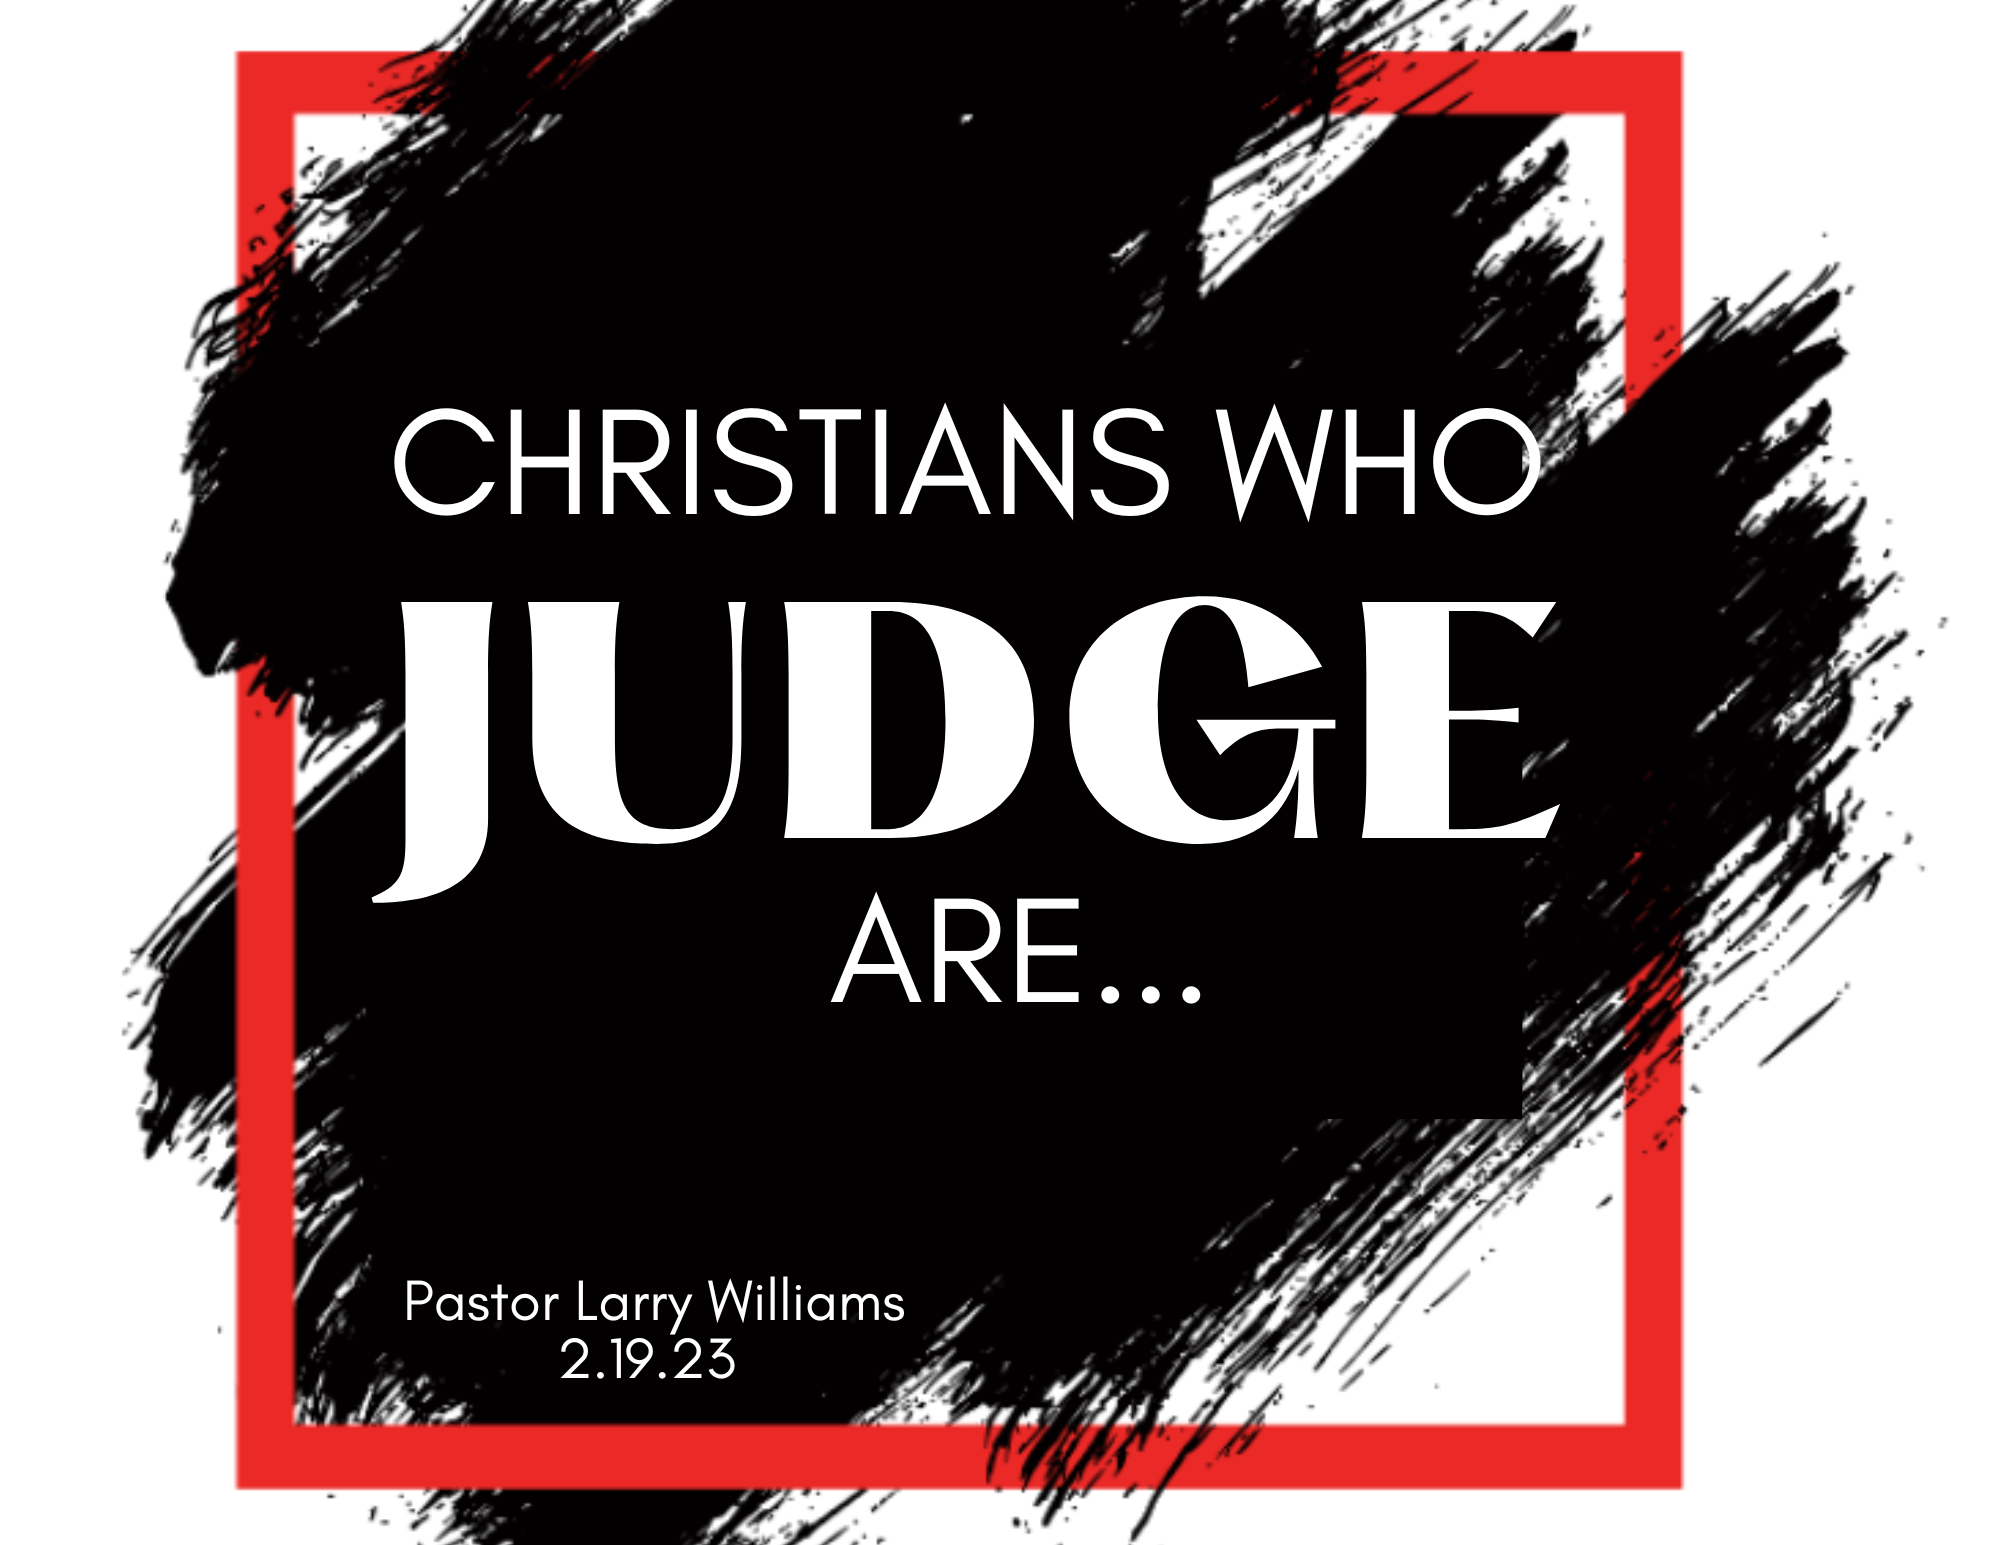 Christians Who Judge Are...